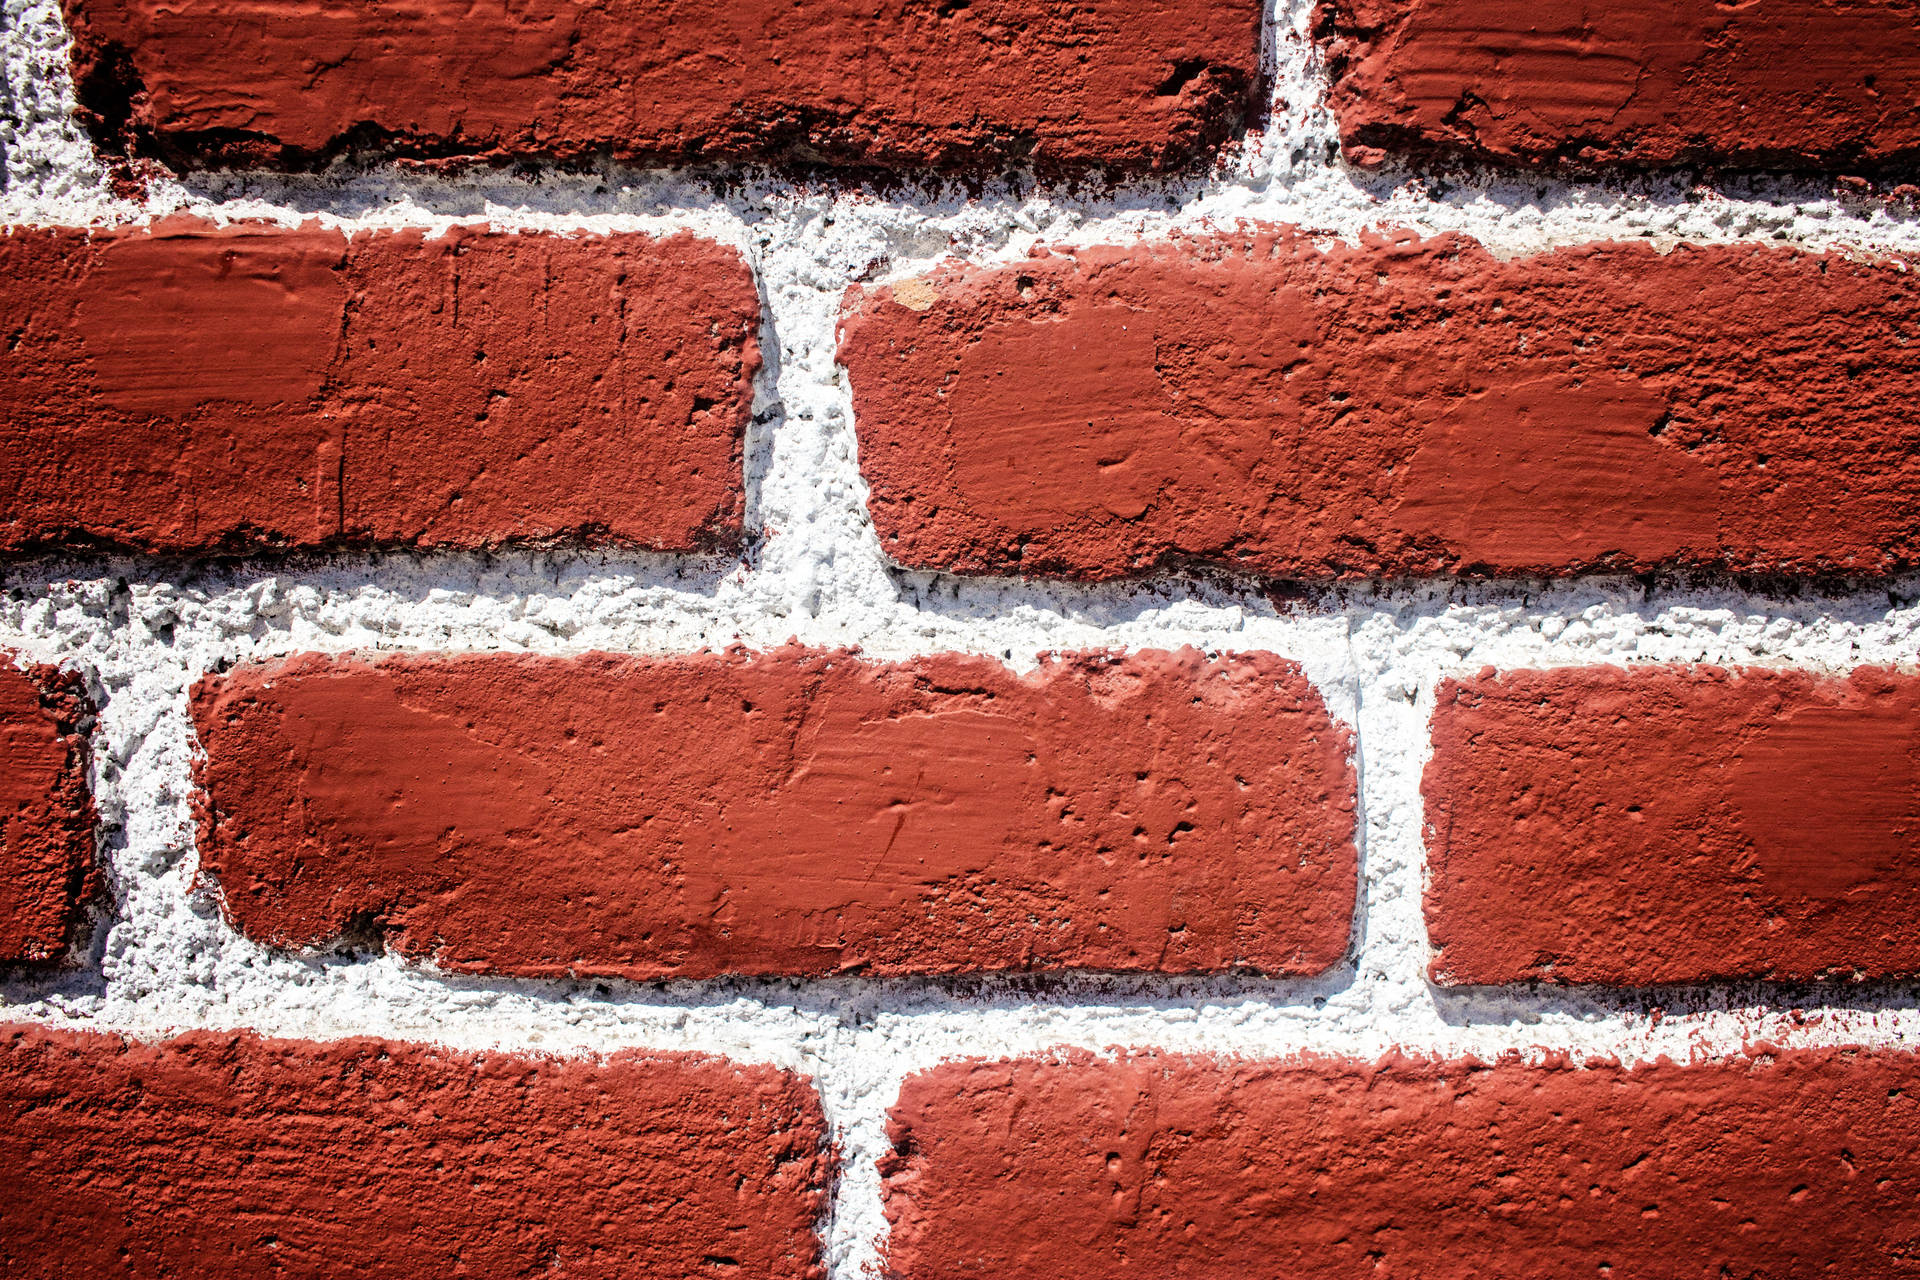 6000X4000 Brick Wallpaper and Background